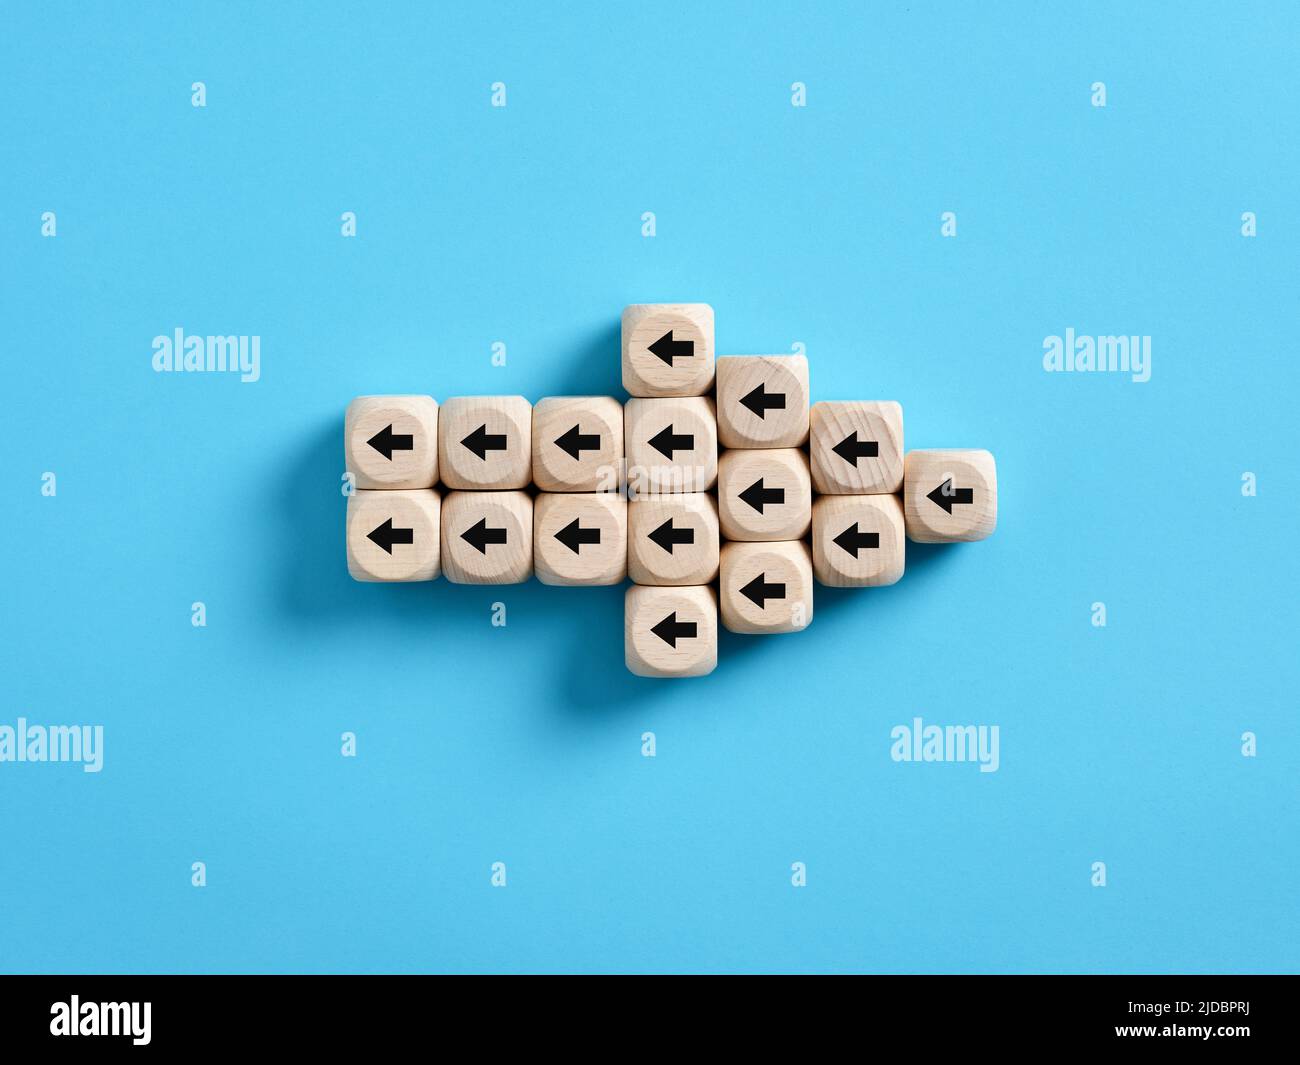 Arrow icon made of wooden cubes with little arrow icons pointing opposite direction. Resistance to change in business concept. Stock Photo